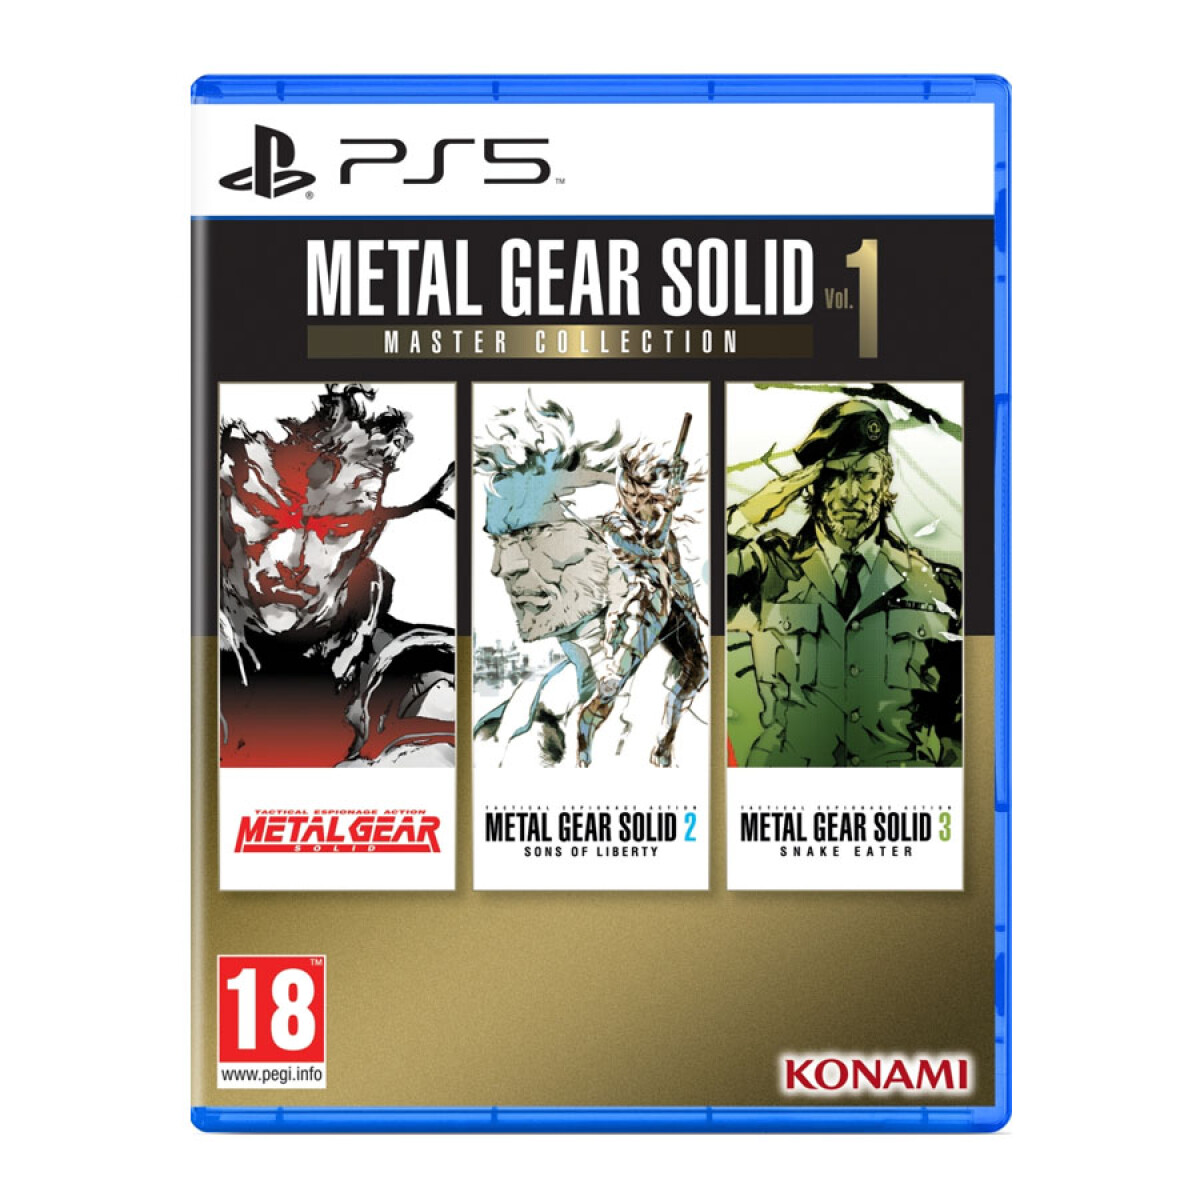 Metal Gear Solid Vol. 1 Master Collection 